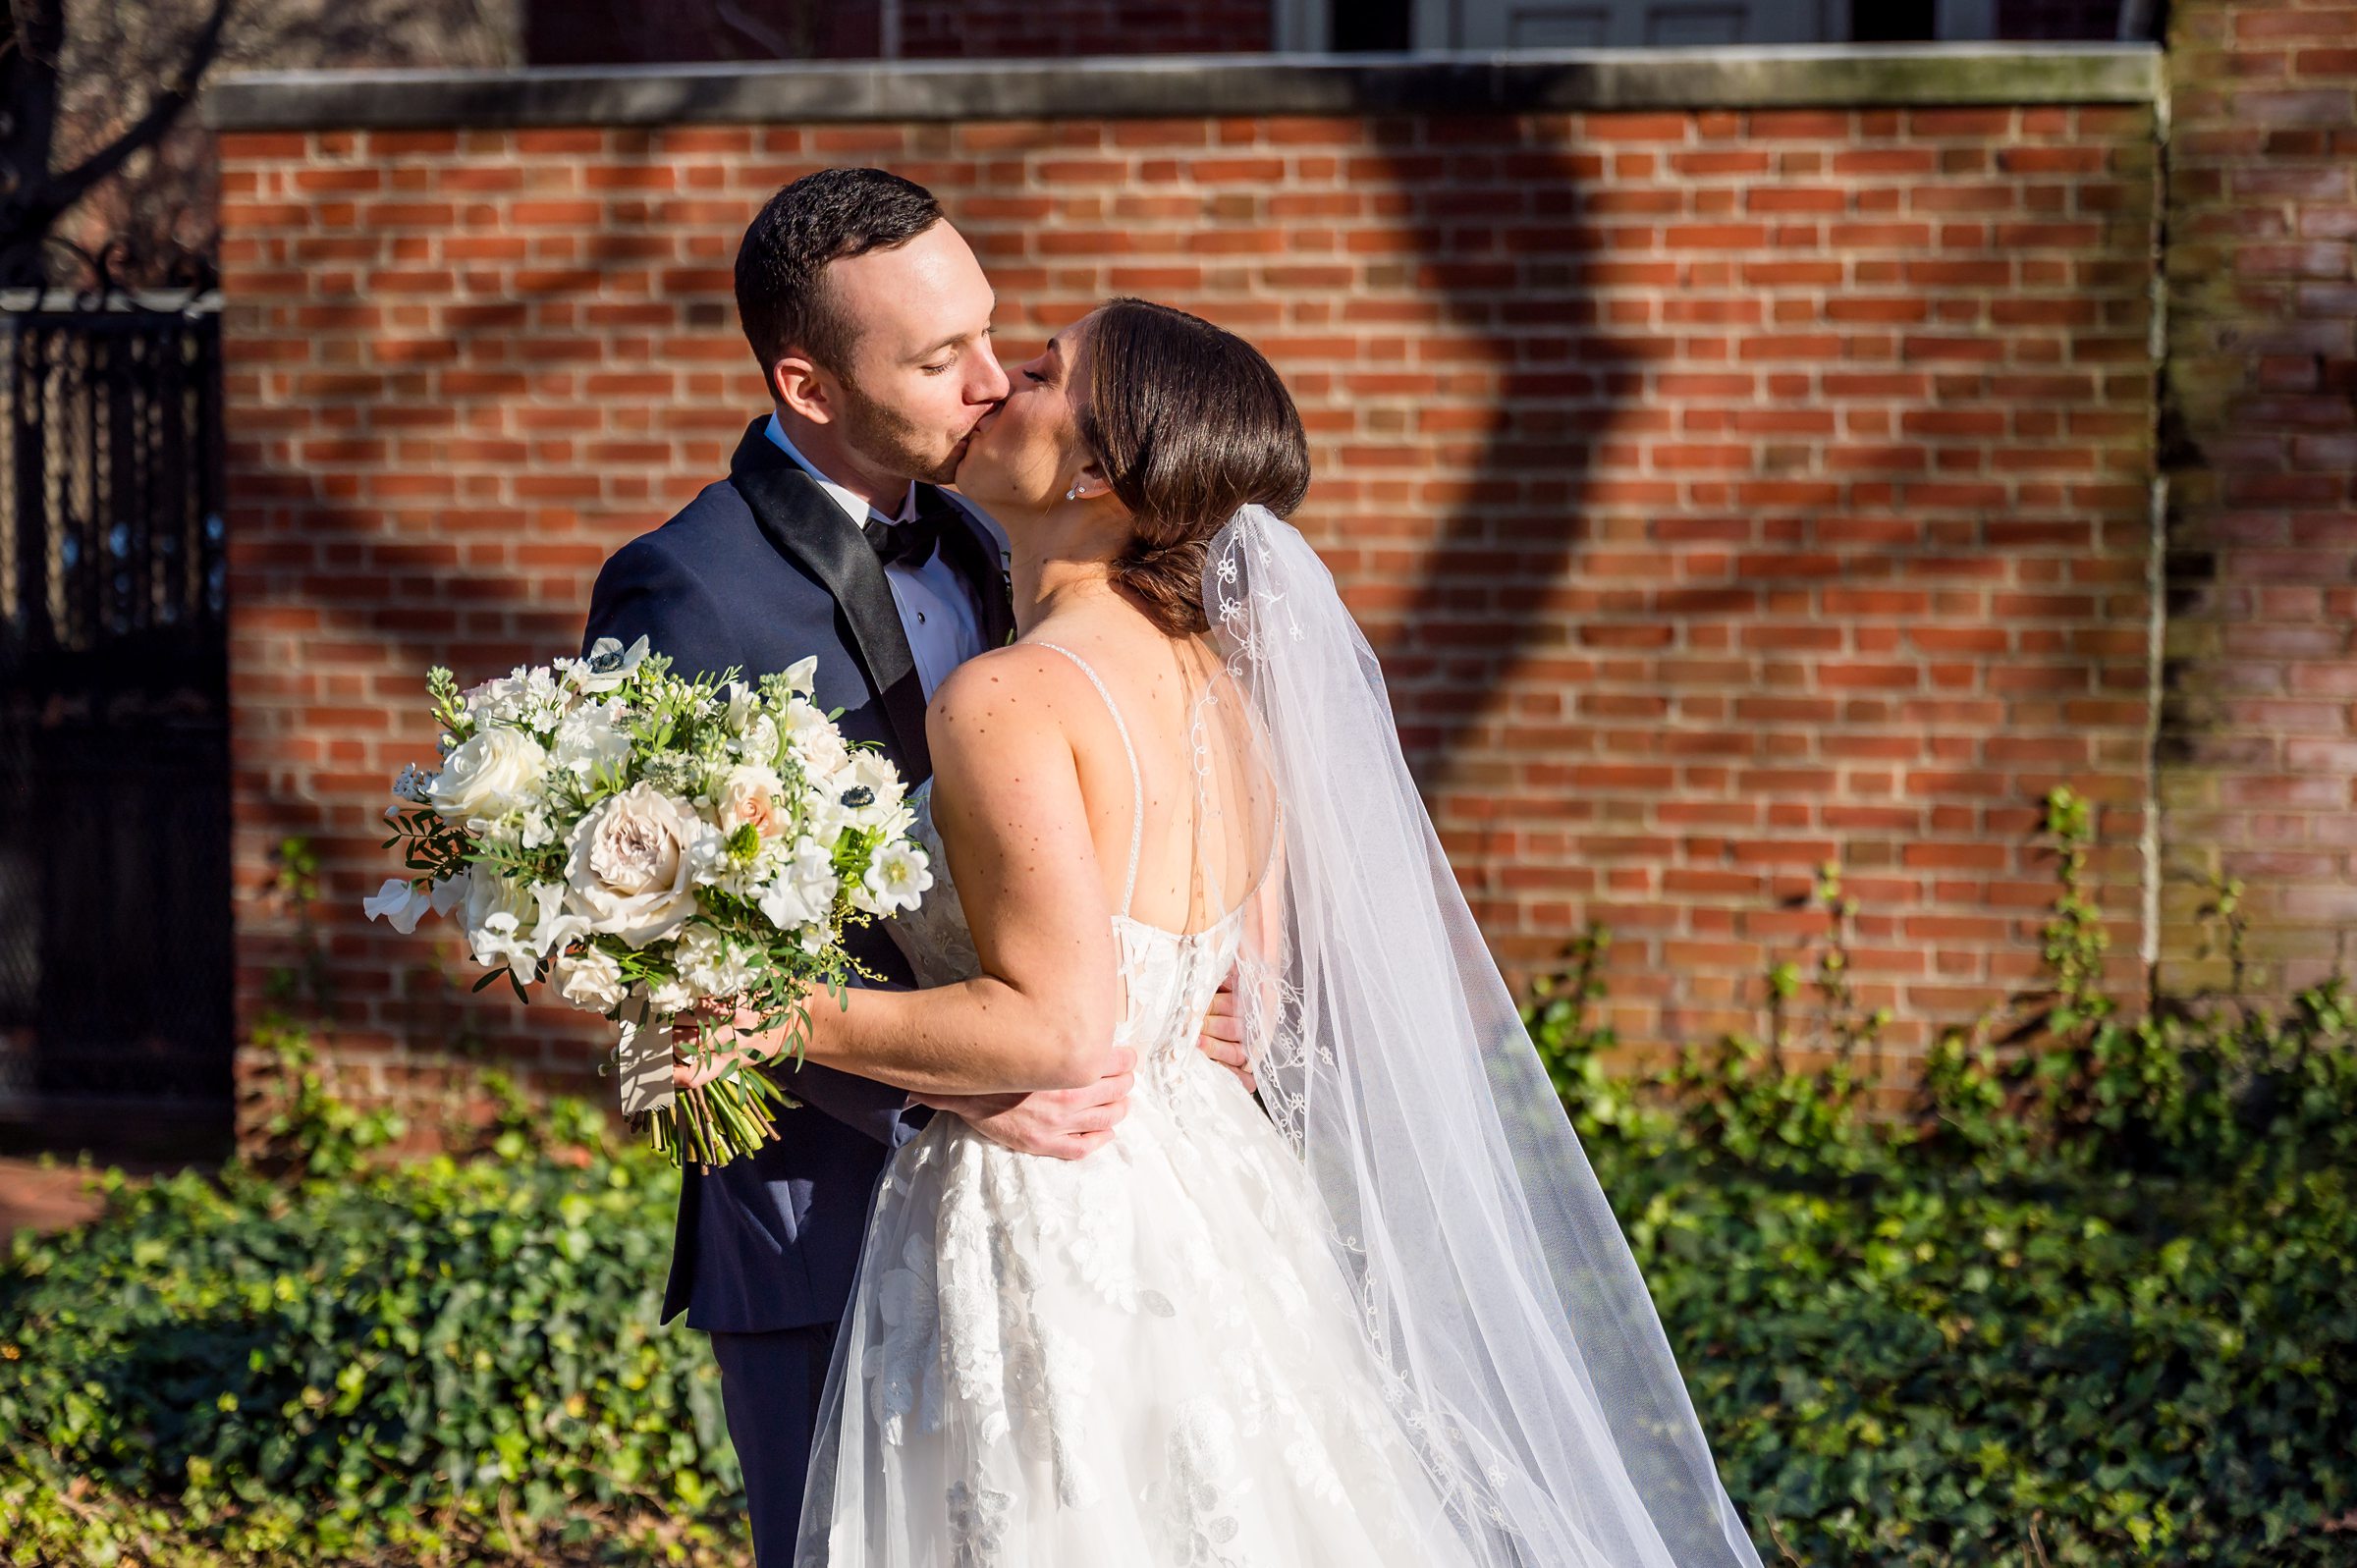 At a Lilah Events wedding, the bride and groom share a kiss in front of a beautiful brick building.